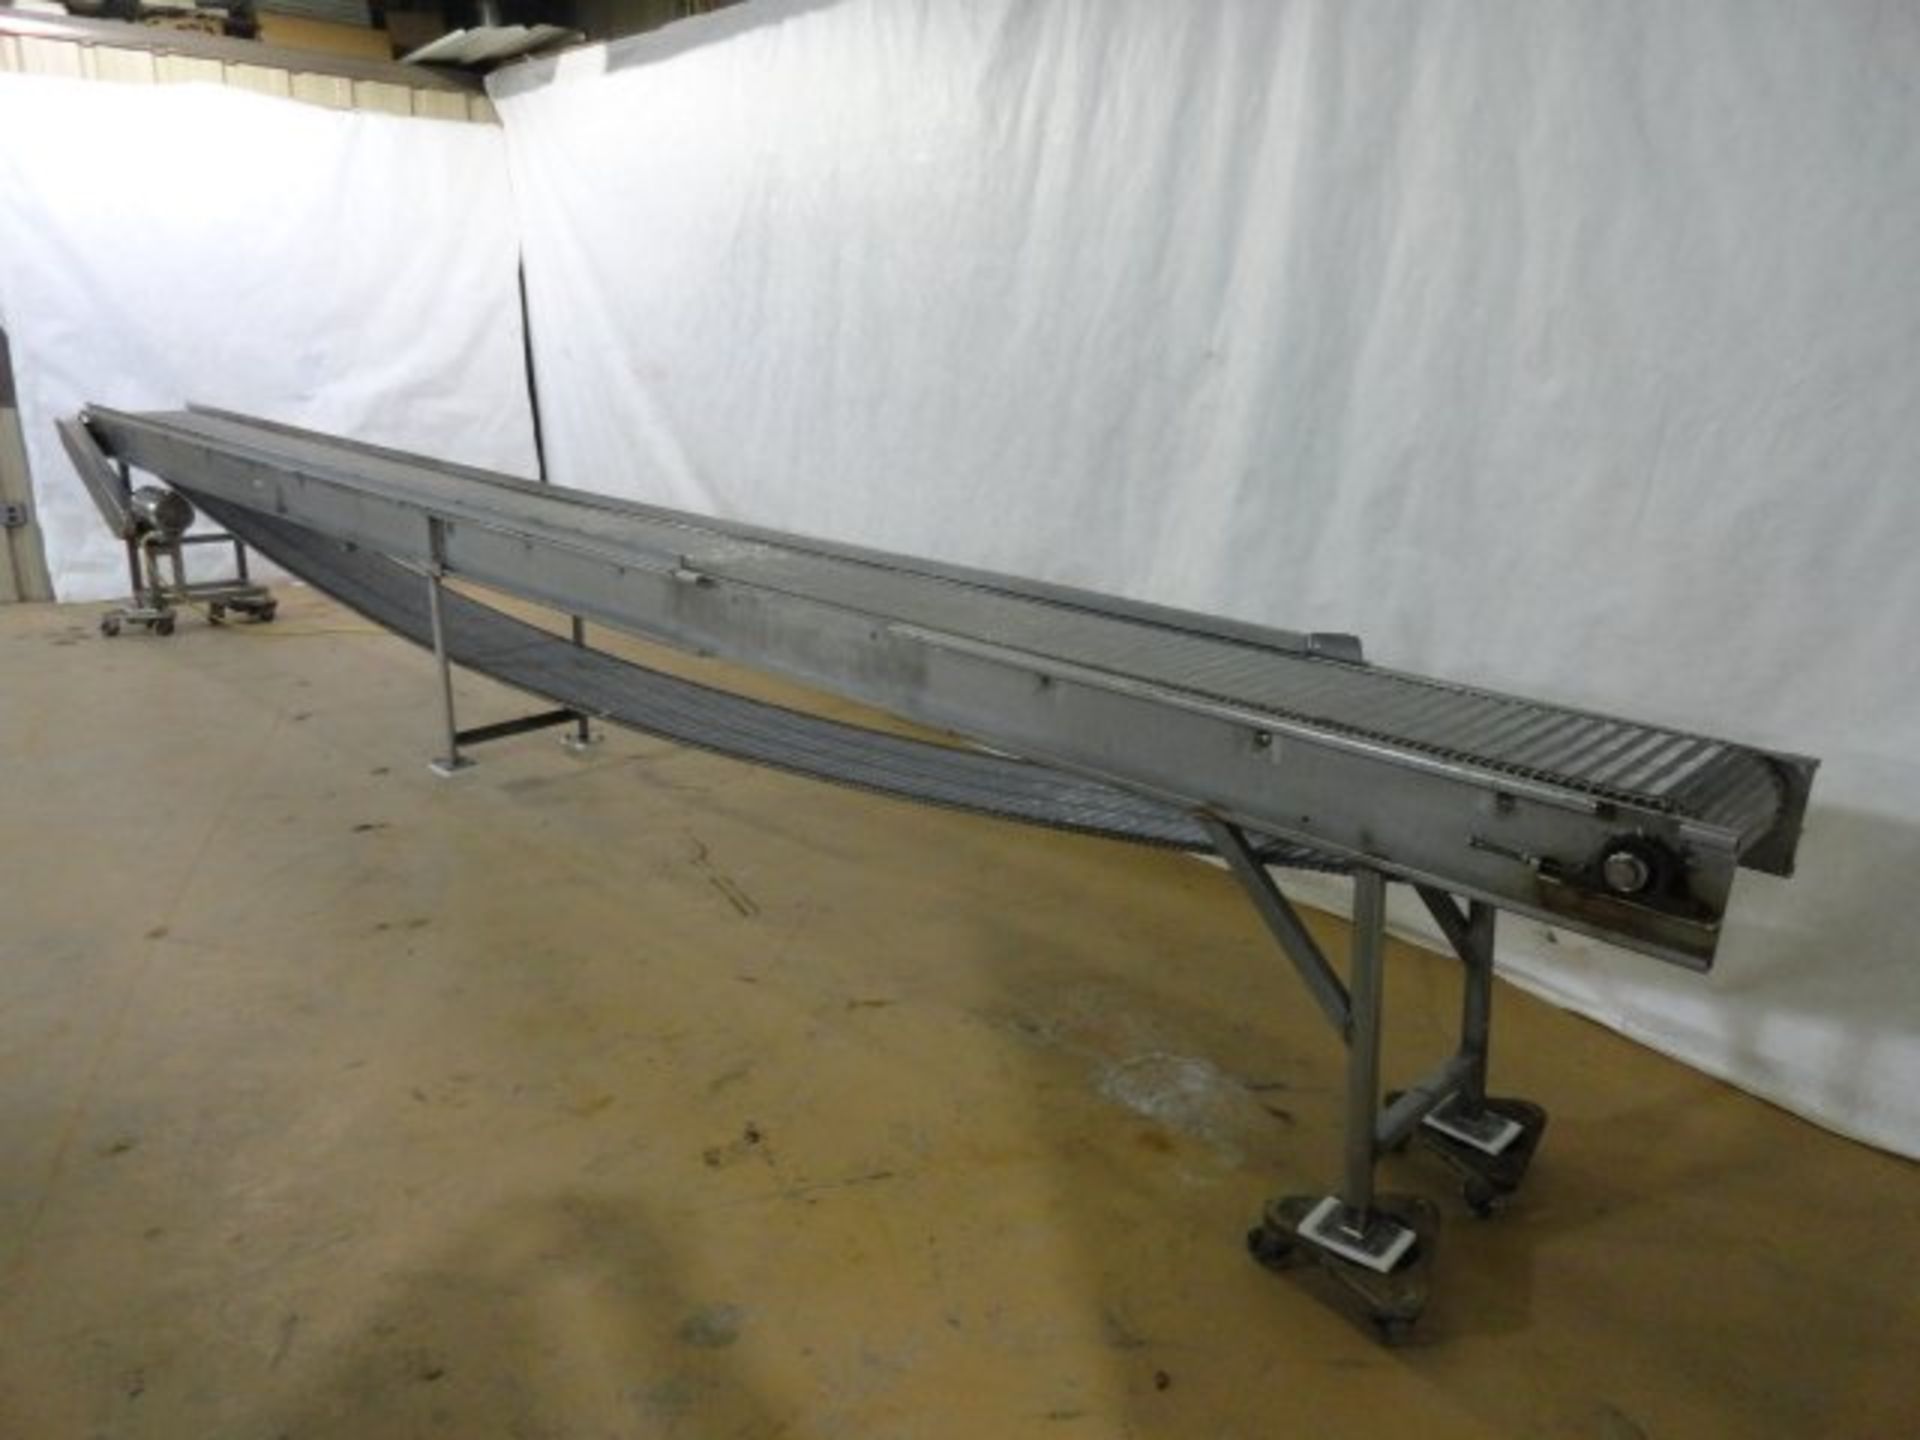 Stainless Steel Wire Mesh Belt Conveyor, 14"W x 23' L. - Image 4 of 5